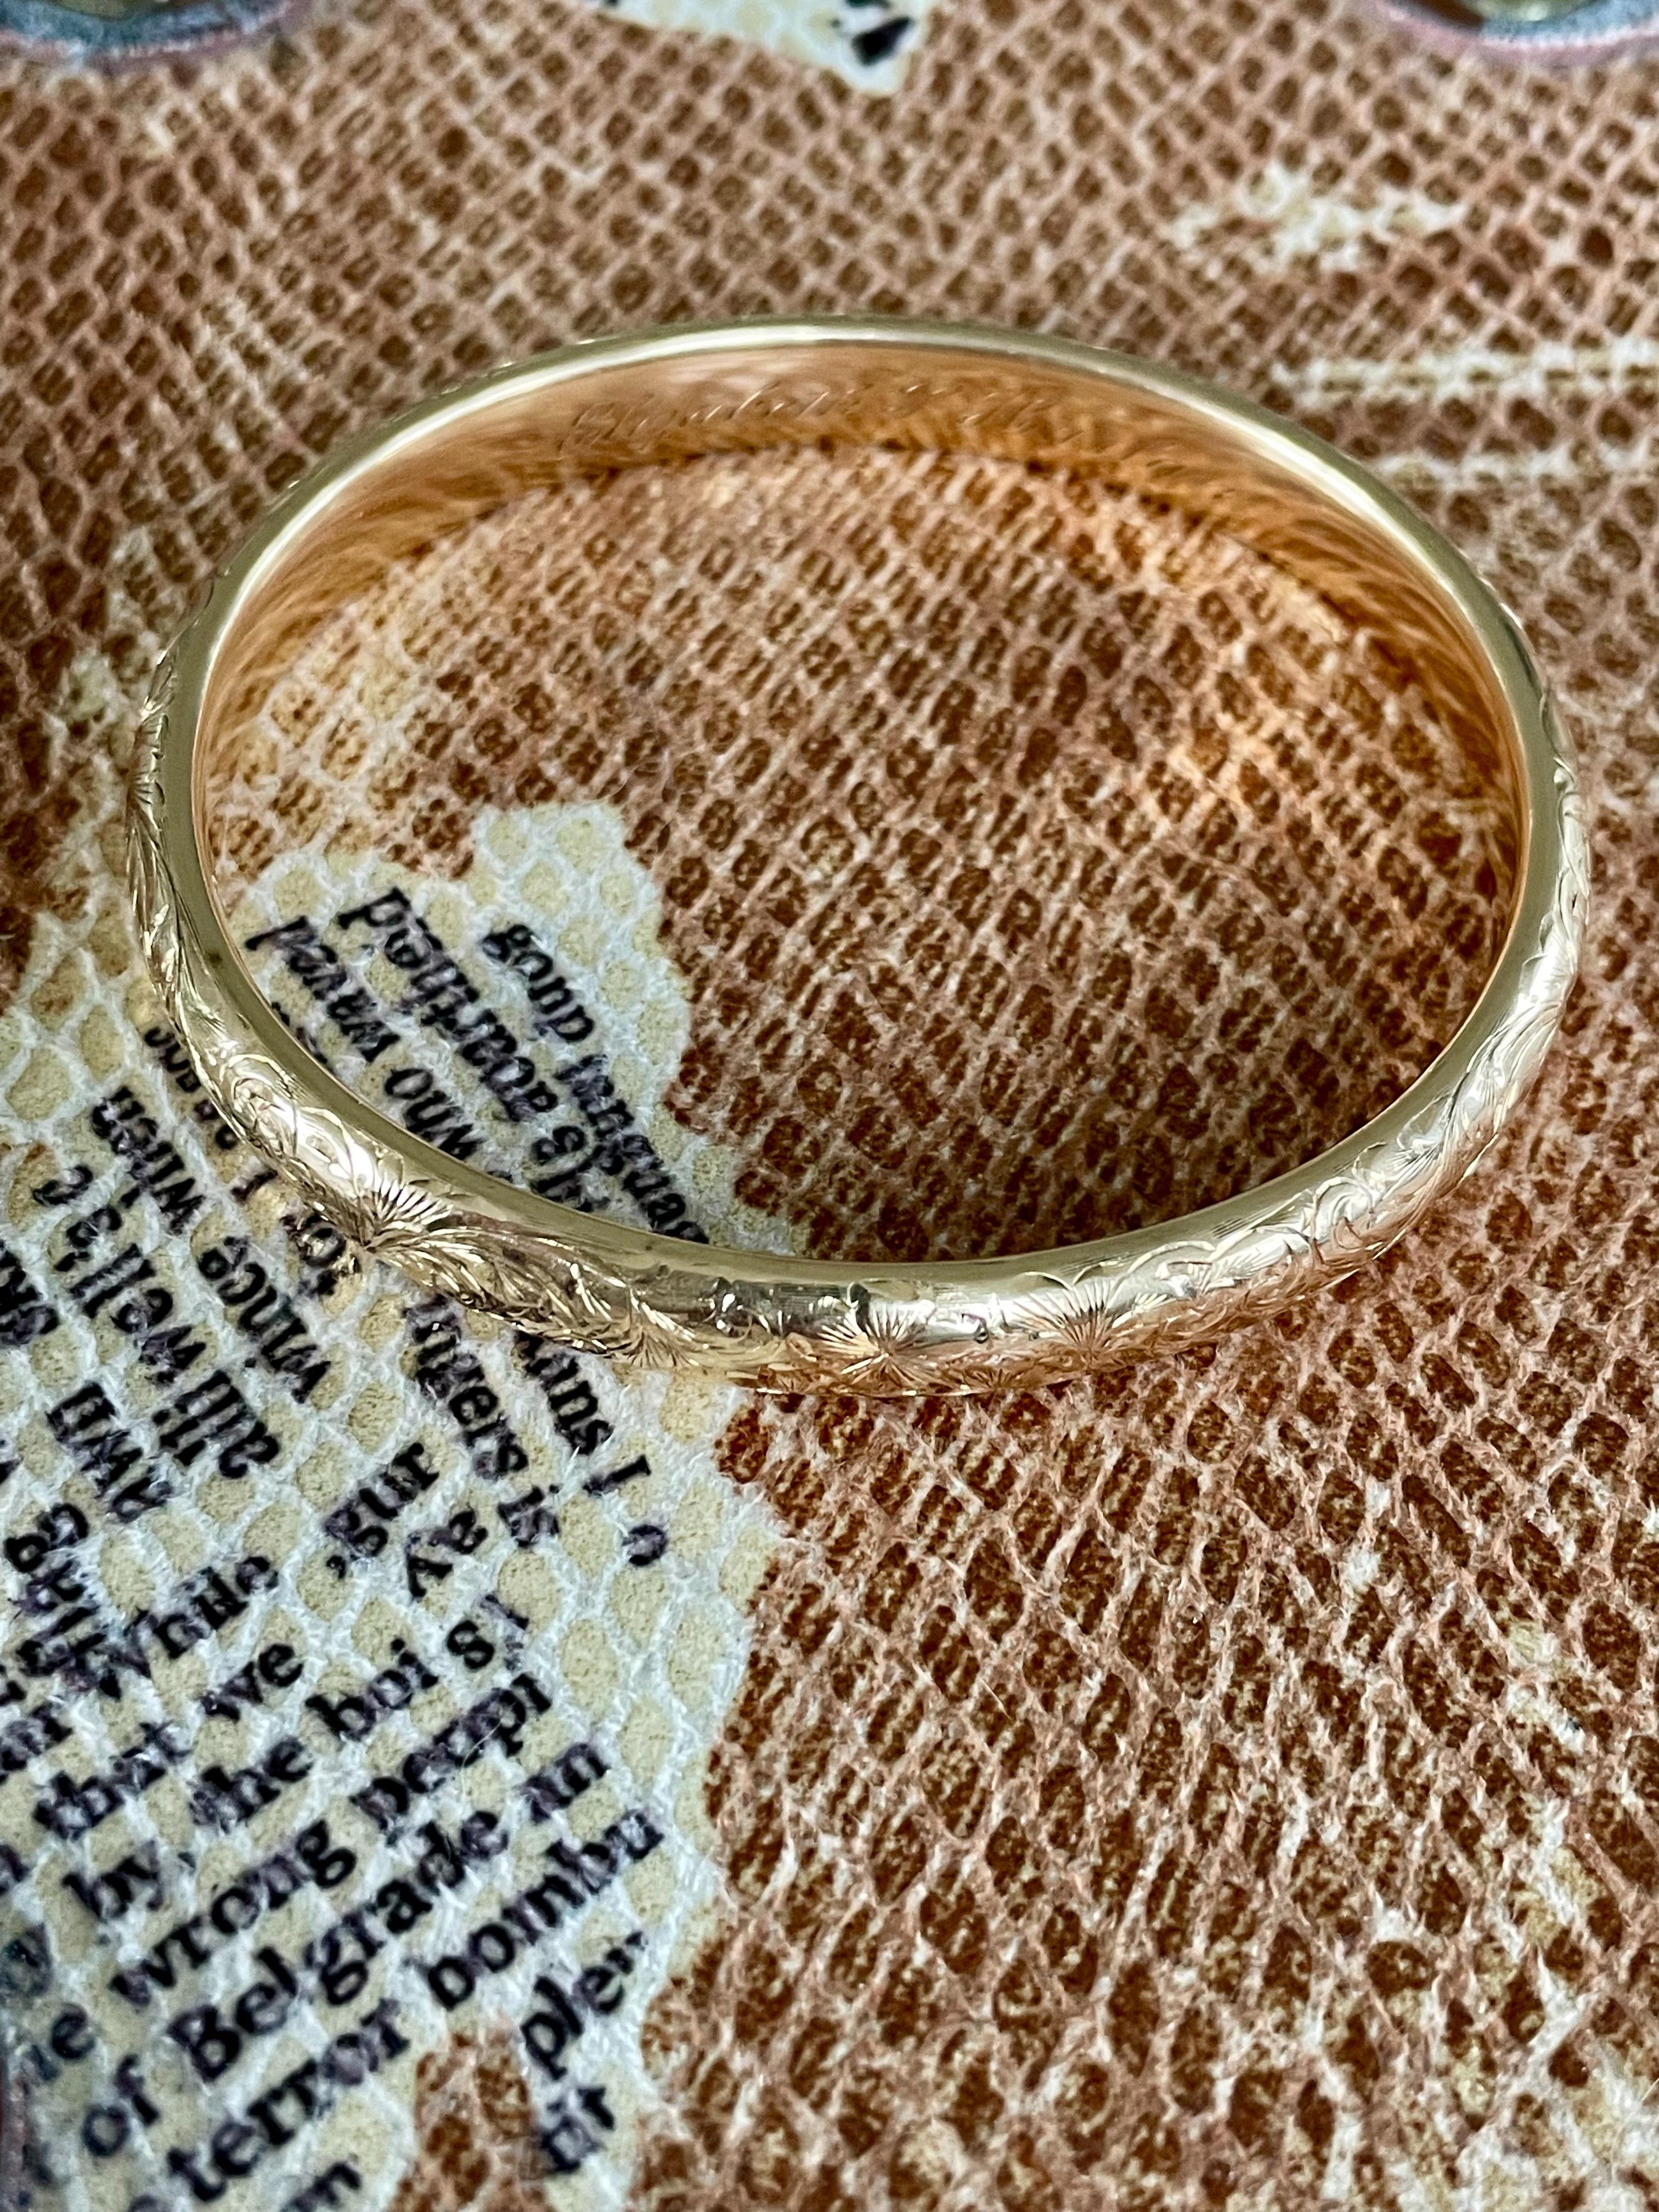 This beautiful, antique, 14 karat yellow Gold bangle is Art Nouveau.  It features lovely floral engraving encircling the entire circumference of the bangle.  

The inside is engraved:  Elizabeth S. Harlan

Stamped: WAB:  Wordley Allsopp &